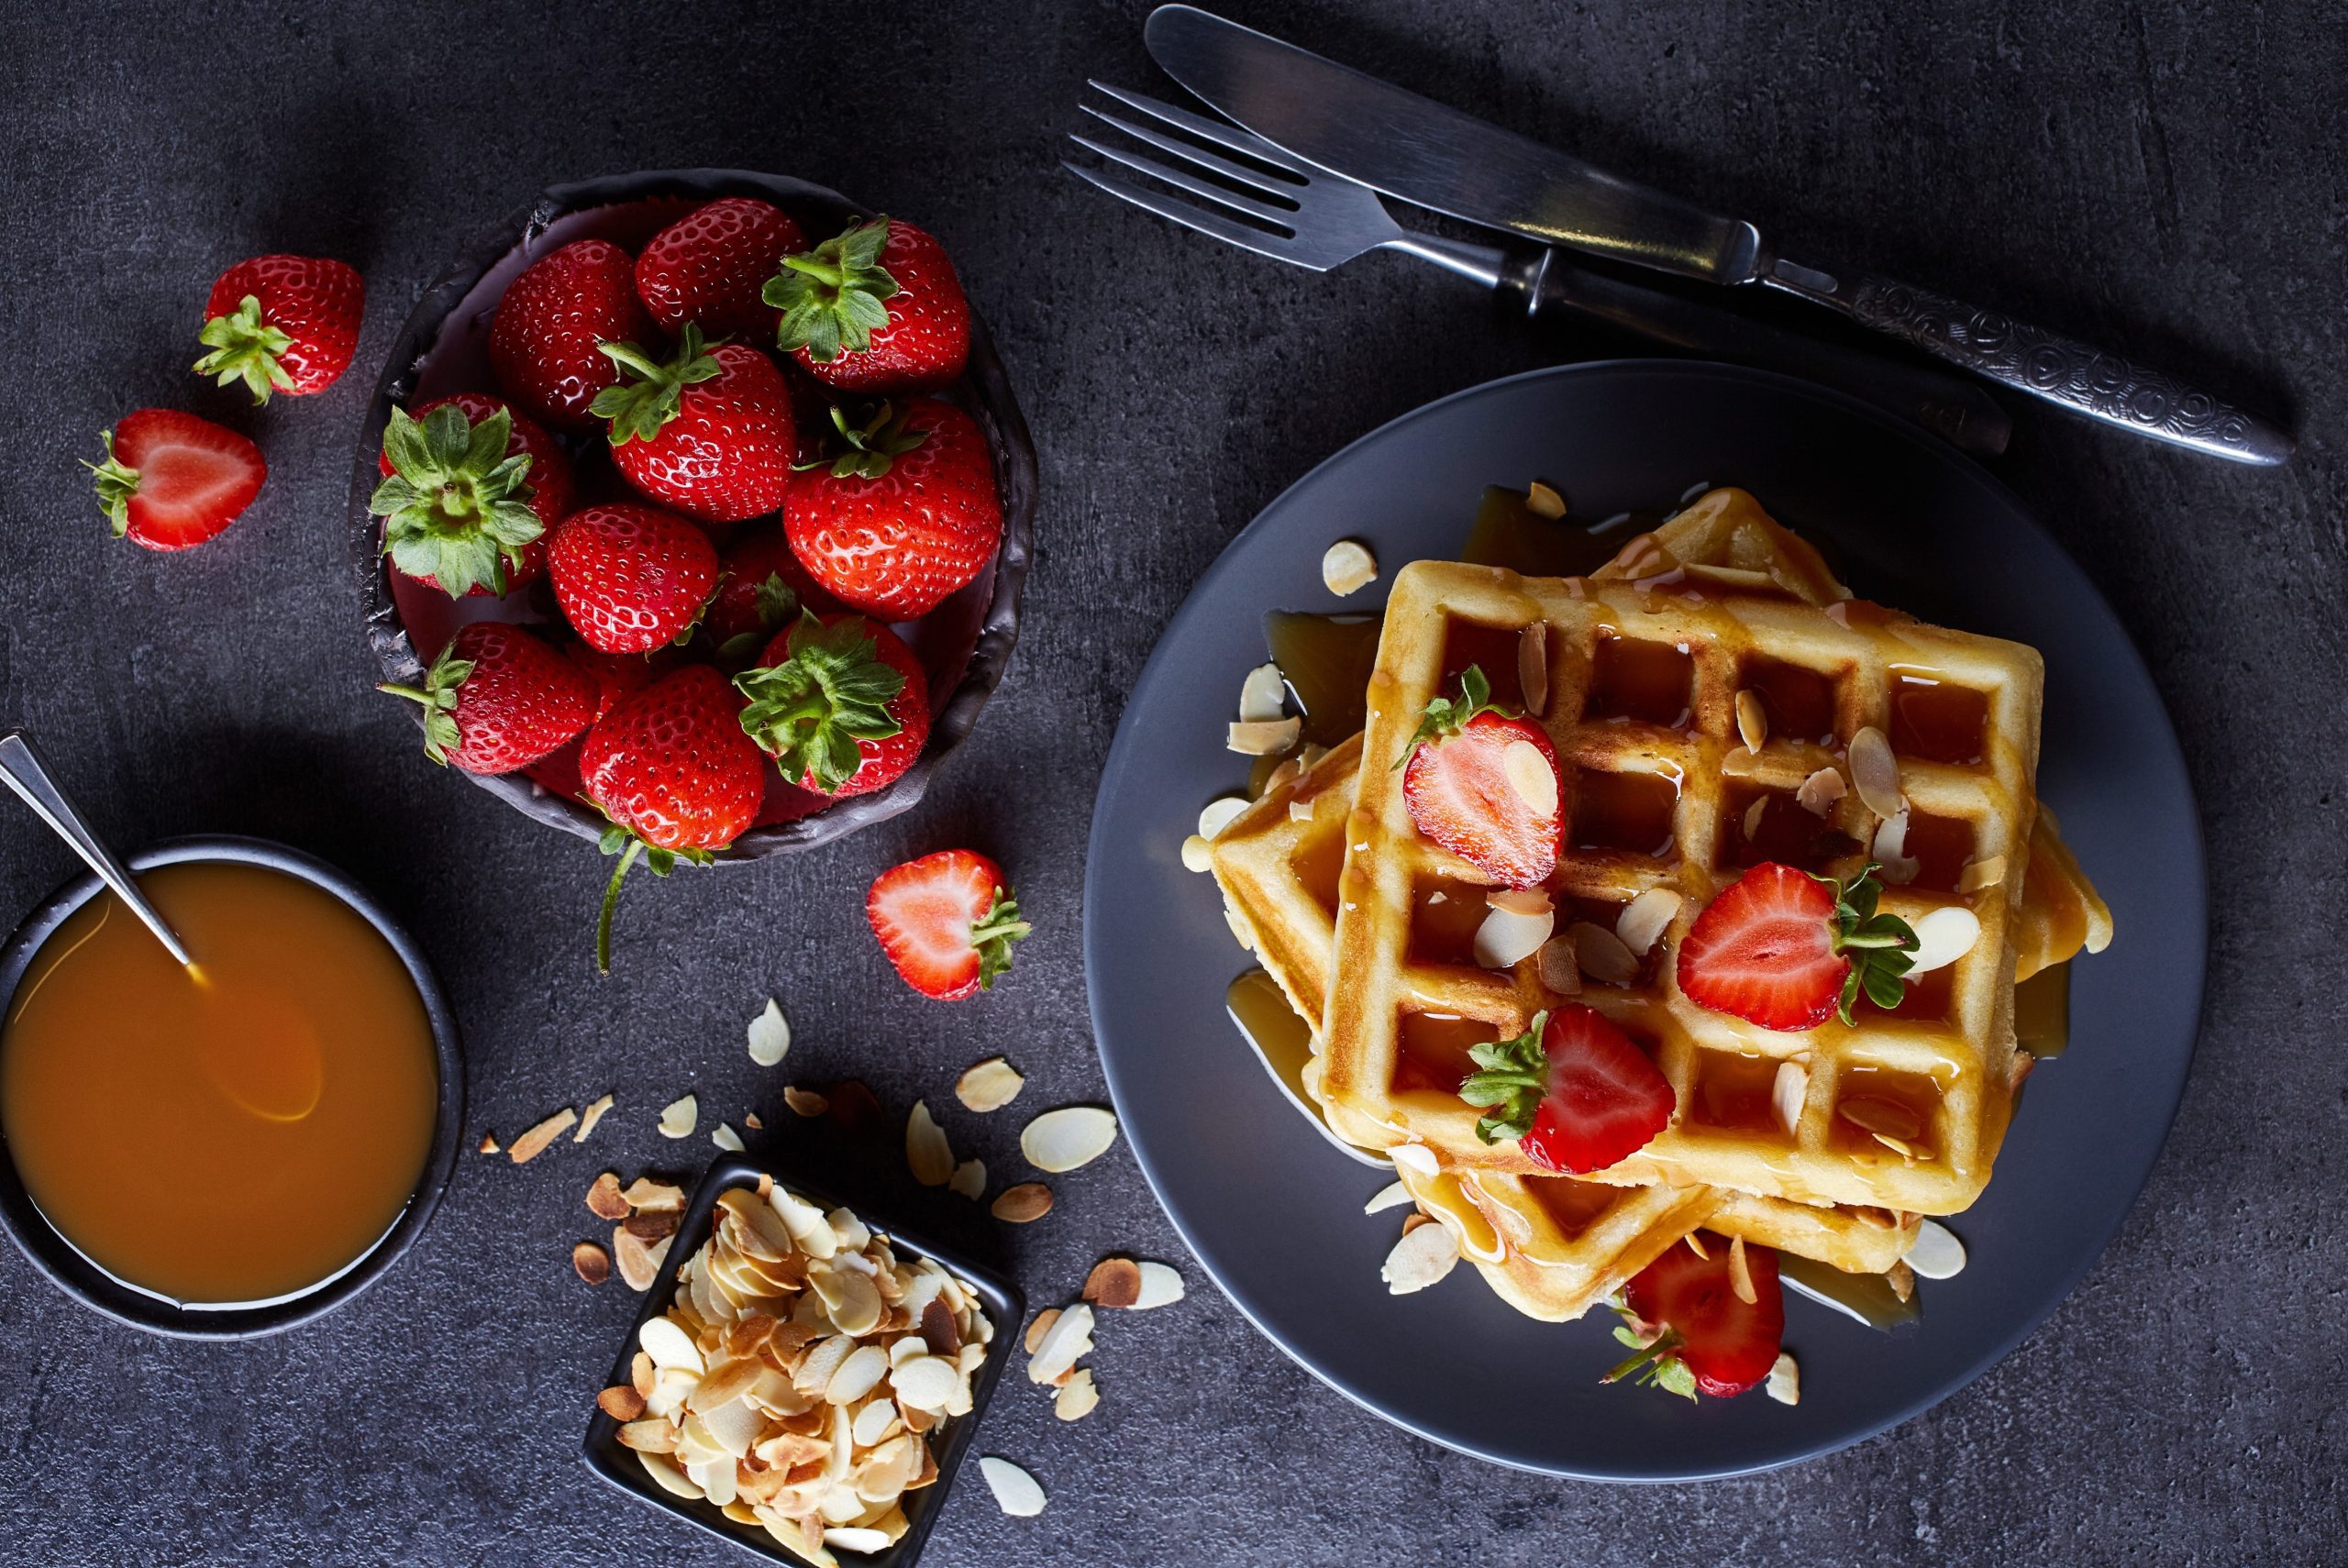 The fifth activity in the 10 best things to do in Belgium is enjoying Belgian Waffles